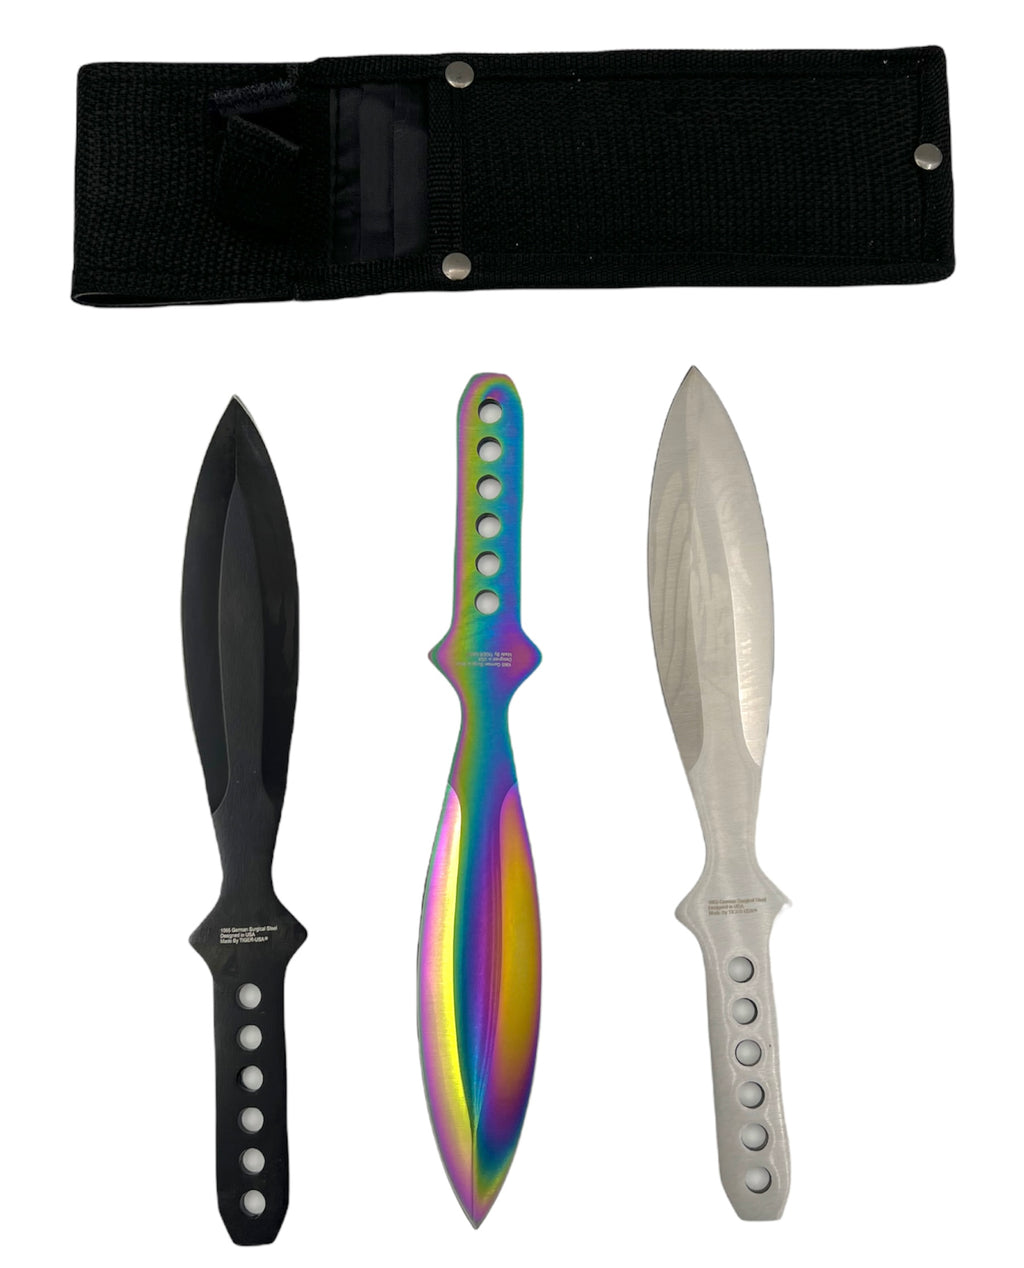 Tiger-USA®3 PC  Throwing Knives RAINBOW  BLACK AND SILVER with case (Set of 3)